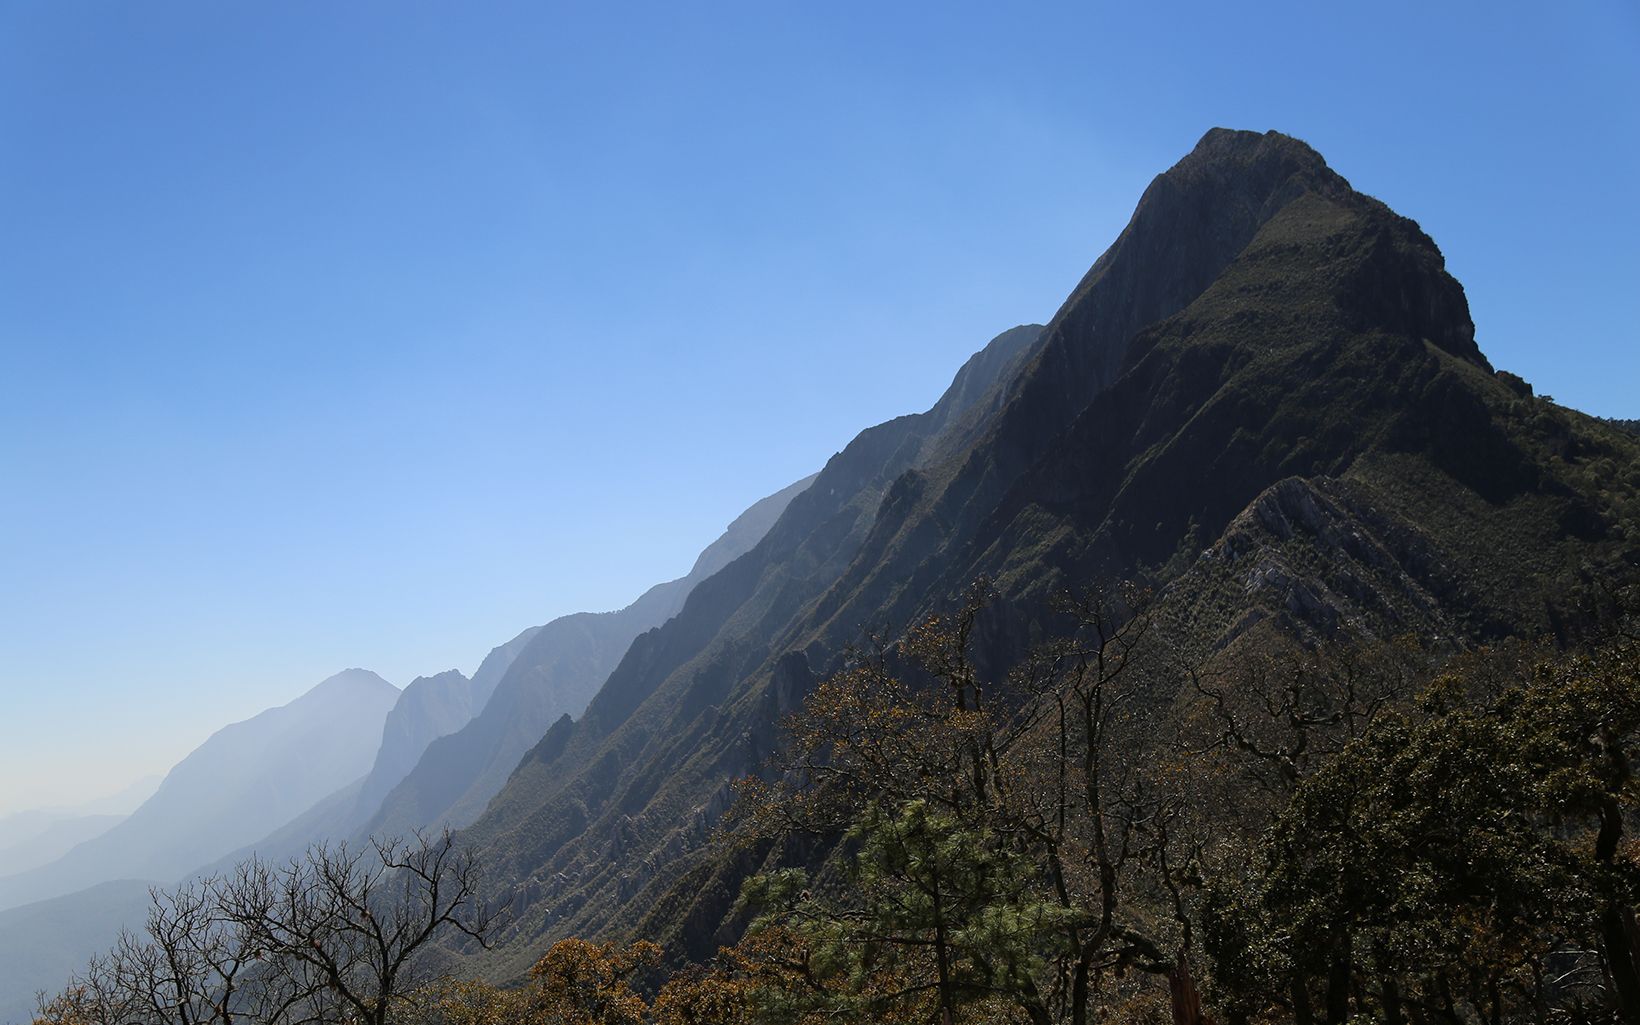 Monterrey, Mexico experienced flooding and drought during recent years. The city is investing in reforestation and many other activities designed to improve the lands within the watershed. © The Nature Conservancy